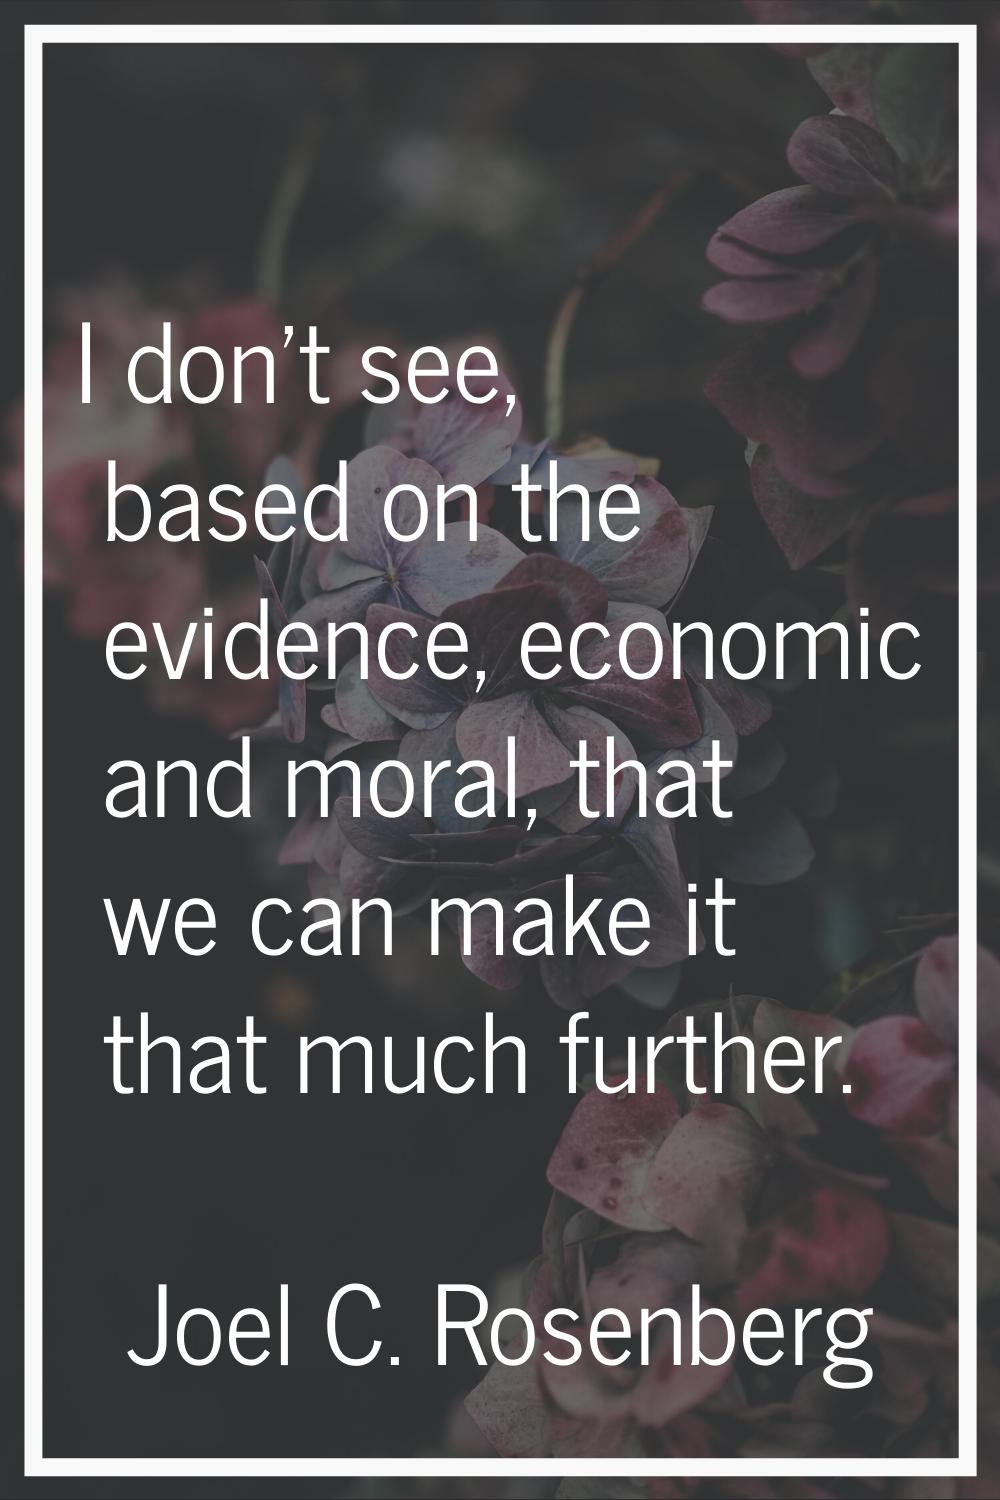 I don't see, based on the evidence, economic and moral, that we can make it that much further.